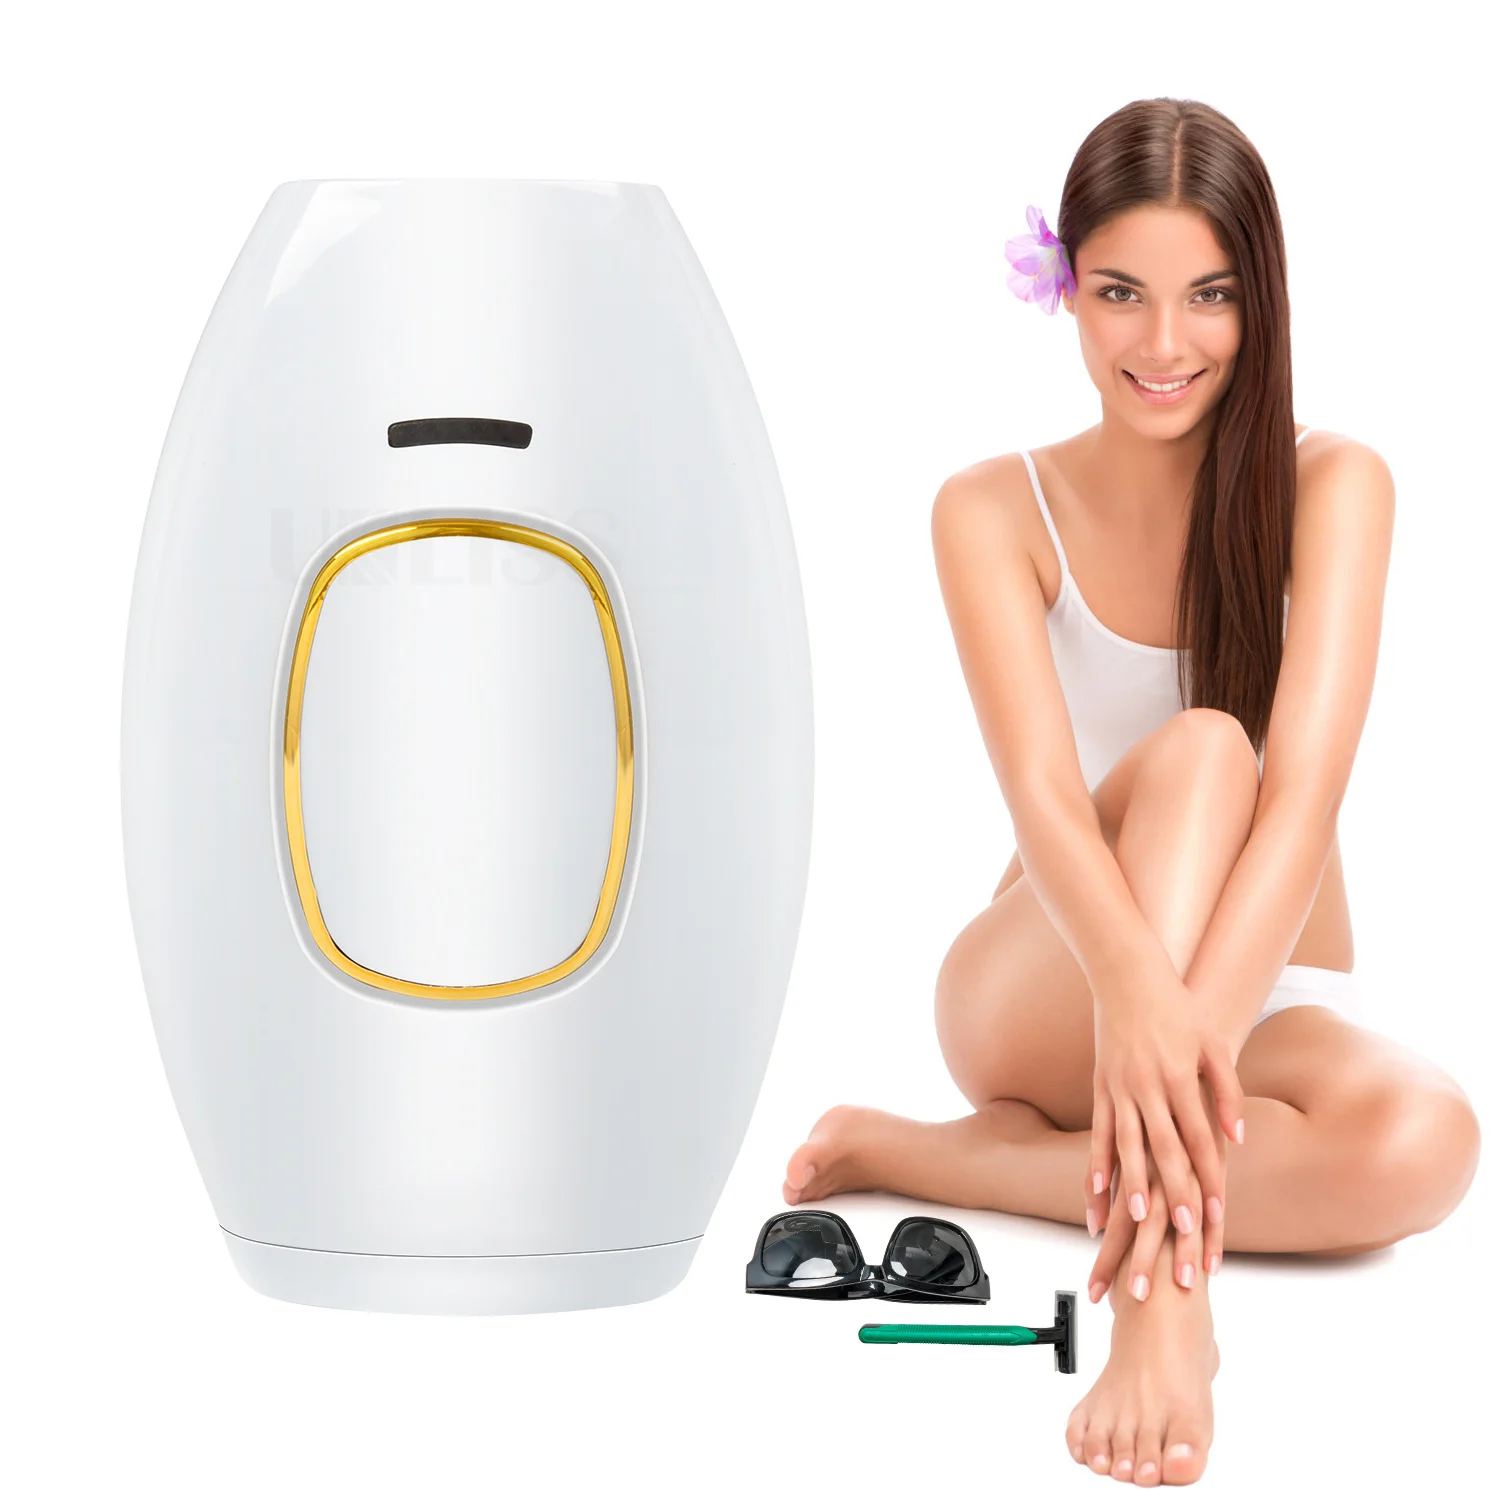 

Home Use Painless Electric Laser Epilator For Women Permanent IPL Hair Removal 600000 Flash Hair Remover Photoepilator Device